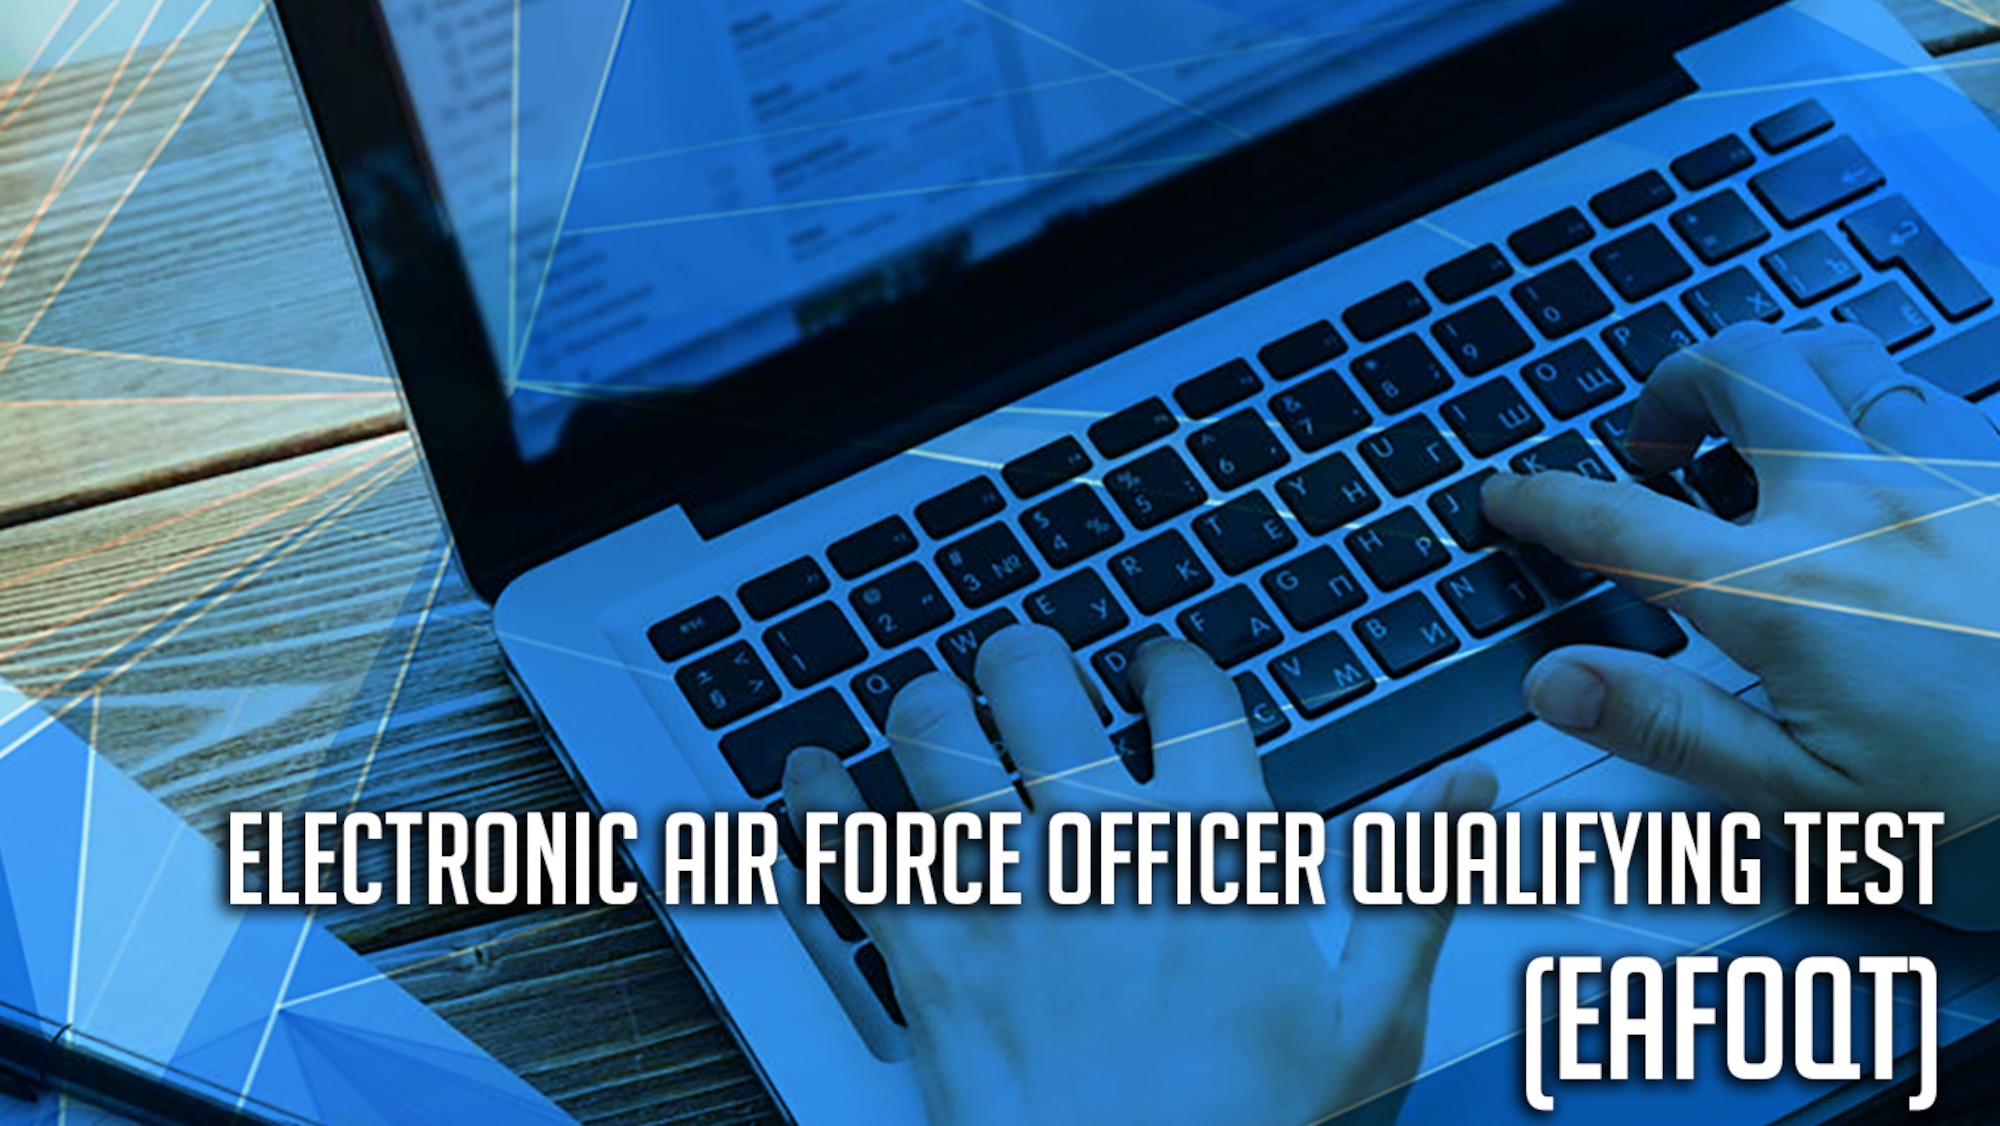 Due to COVID-19 limiting opportunities to take the traditional Air Force Officer Qualifying Test, Air Force Recruiting Service and the Air Force Personnel Center’s strategic research and assessments branch,  collaborated to create the first electronic version of the traditional AFOQT.